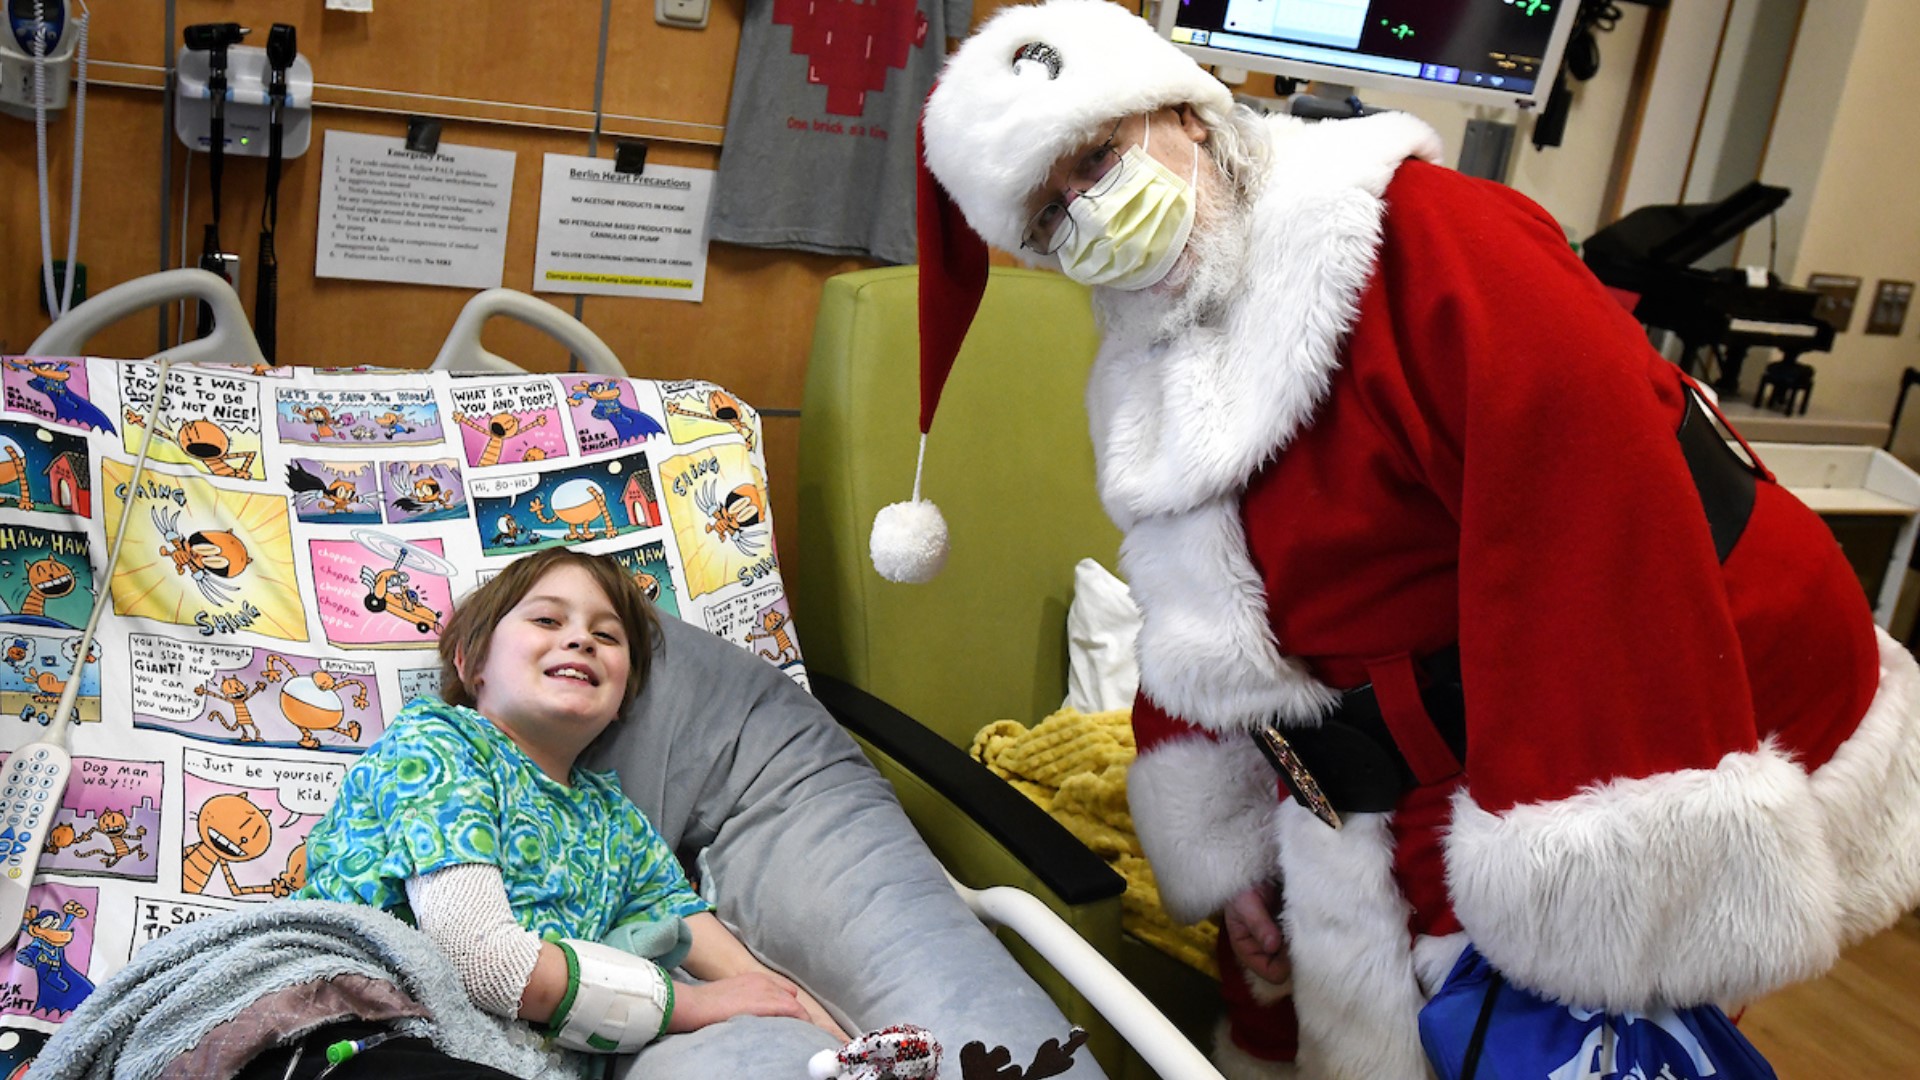 Santa was able to deliver gifts, pose for photos and talk with patients.